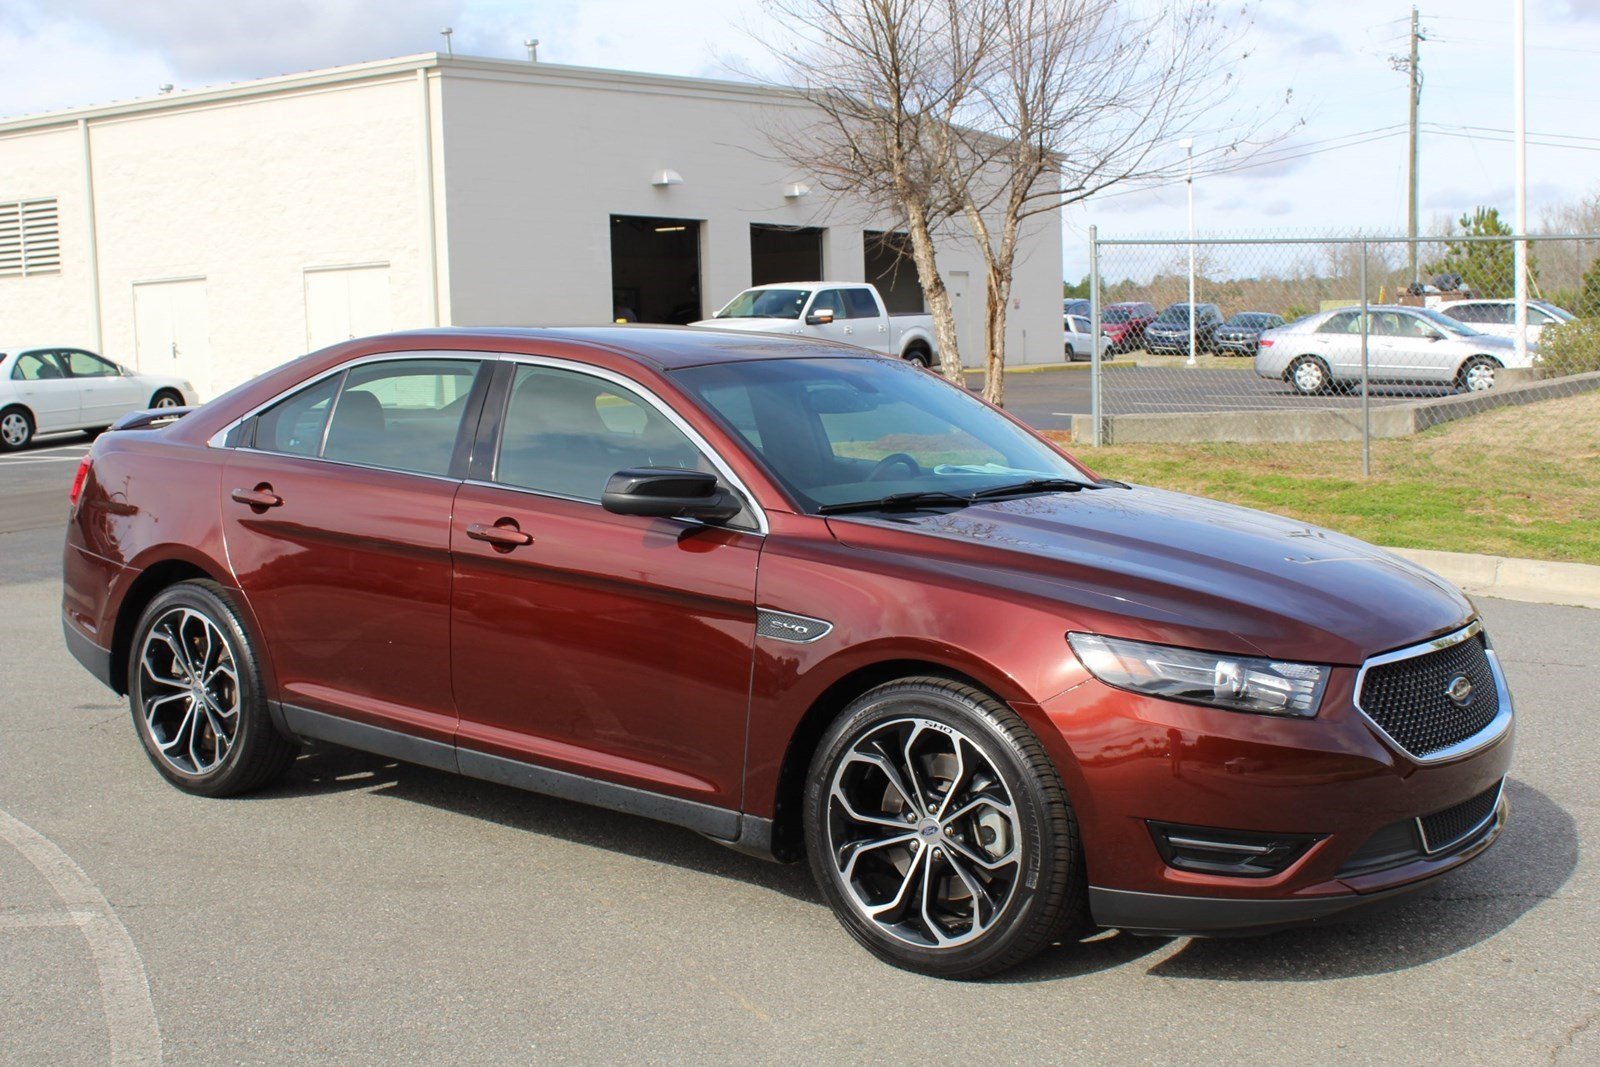 Pre-Owned 2015 Ford Taurus SHO 4dr Car in Milledgeville #F19197A